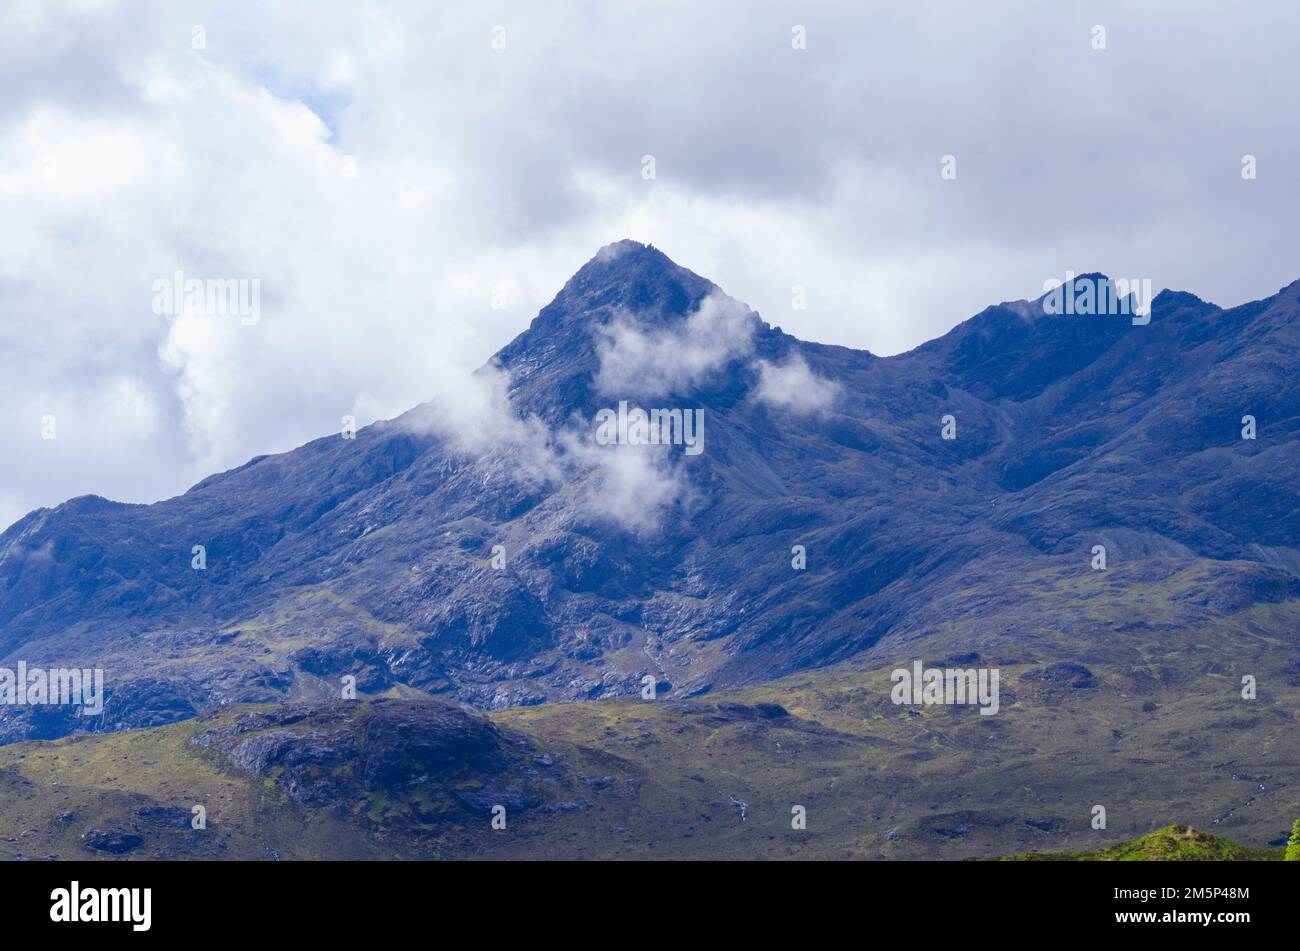 The peaks of Sgurr nan Gillean (965m, centre), Am Basteir (935m) and Basteir Tooth (915m) in the Cuillen ( Cullin ) on the Isle of Skye, Scotland, UK Stock Photo